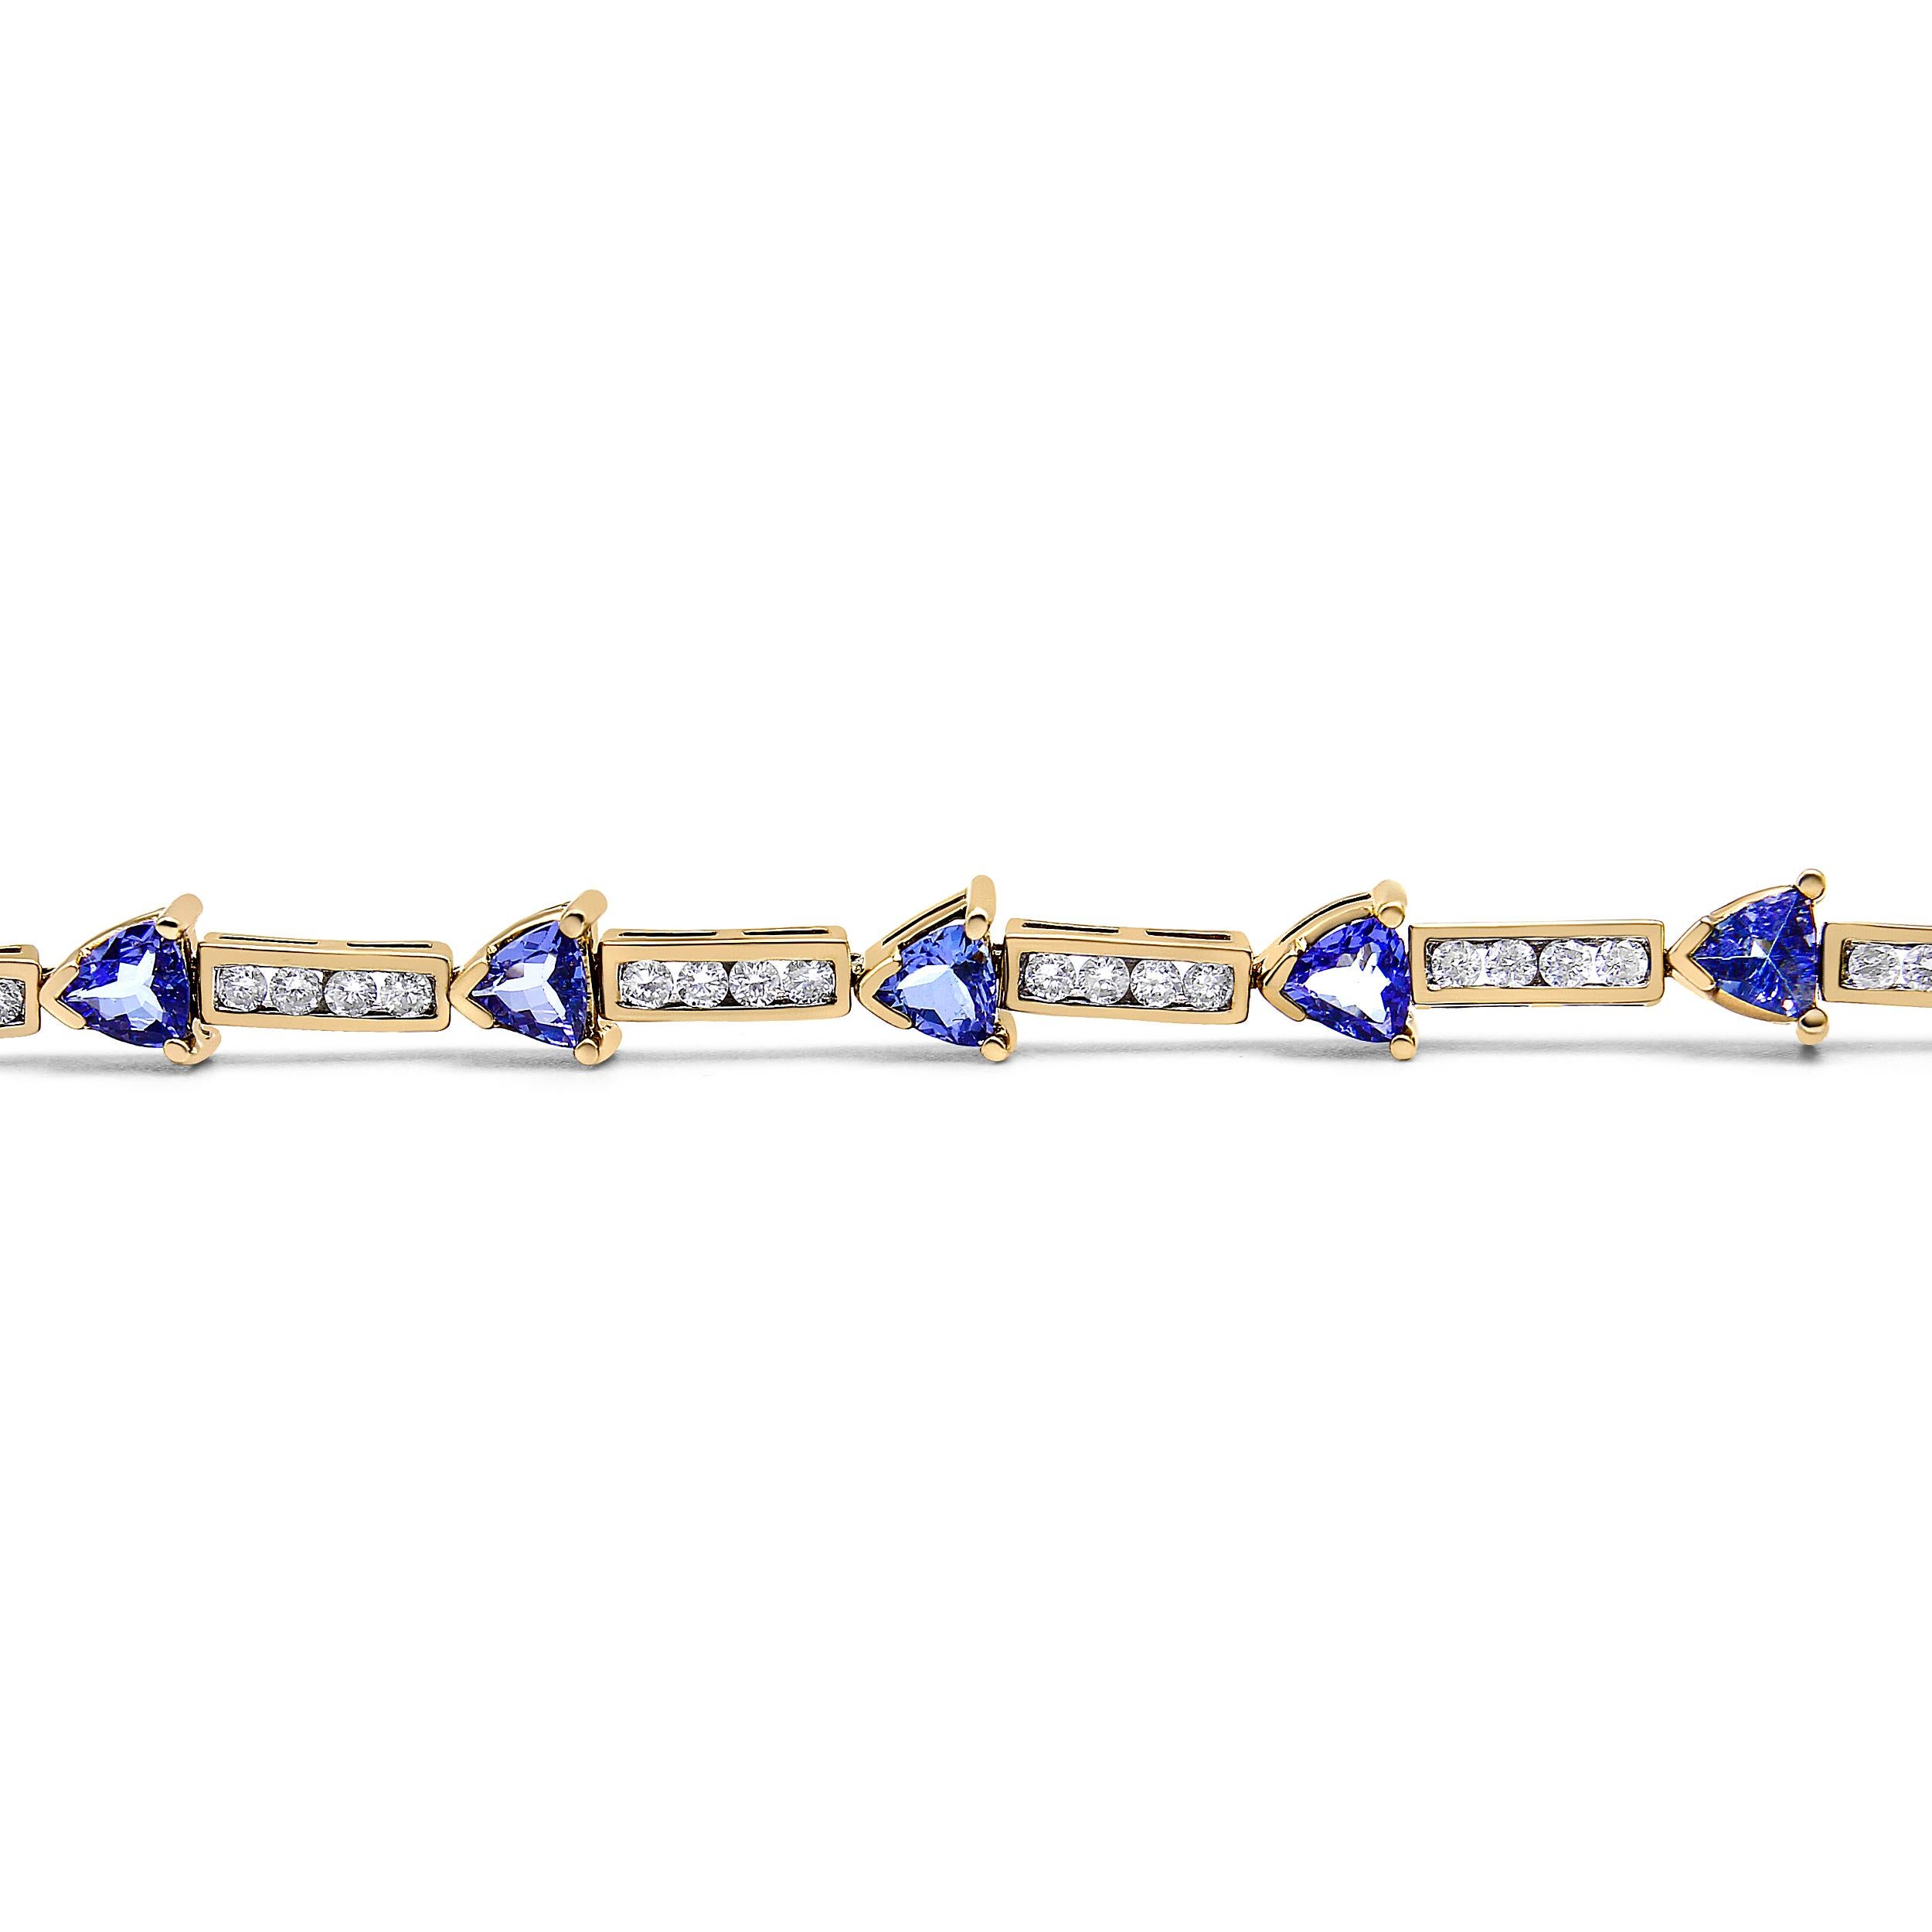 Contemporary 14K Yellow Gold 1 5/8 Cttw Diamond and Trillion Blue Tanzanite Link Bracelet For Sale